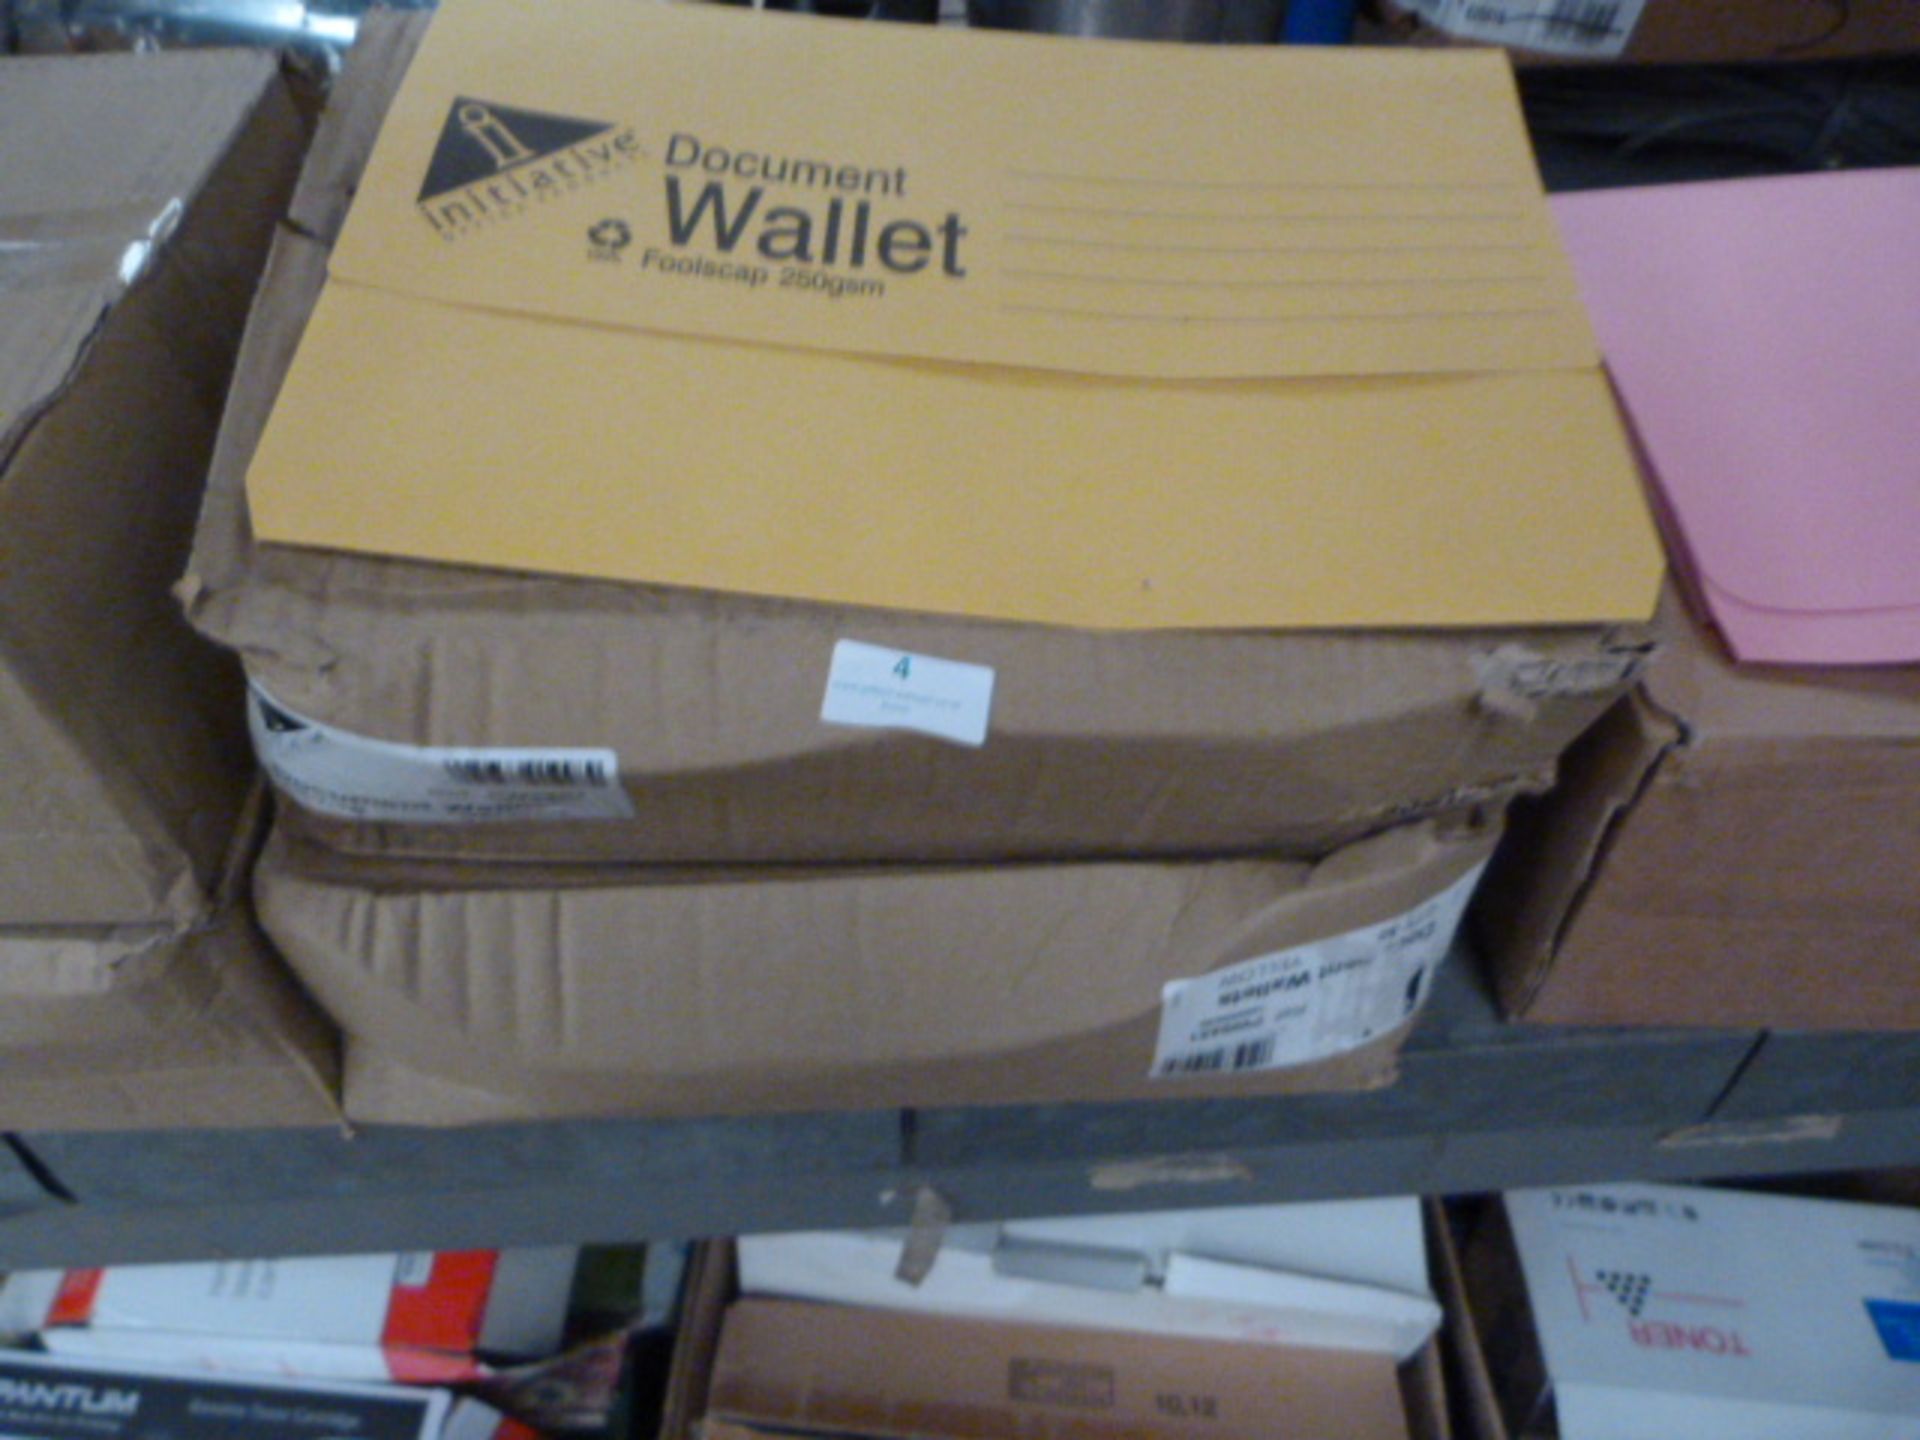 *Two Boxes Containing 50 Document Wallets (Yellow)